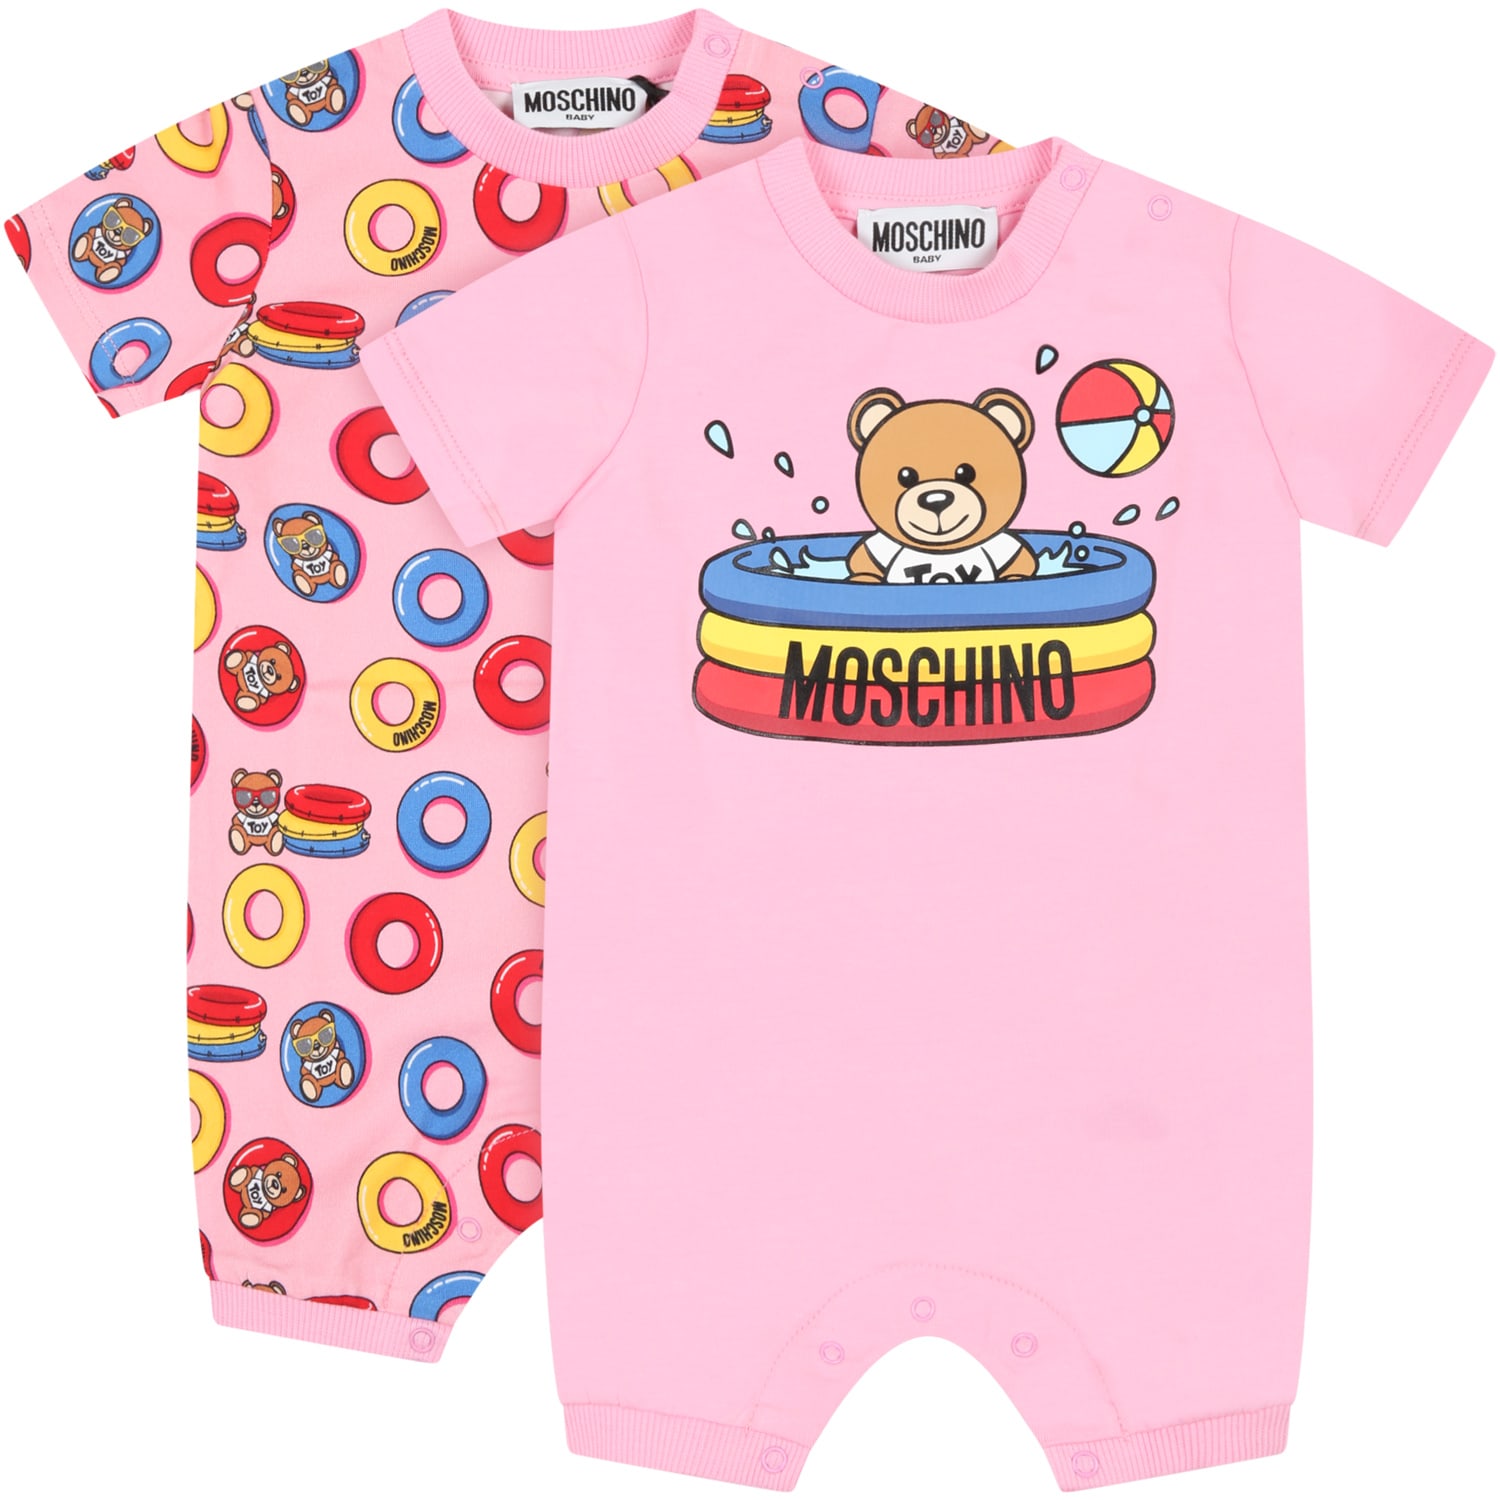 Moschino Pink Set For Baby Girl With Teddy Bears